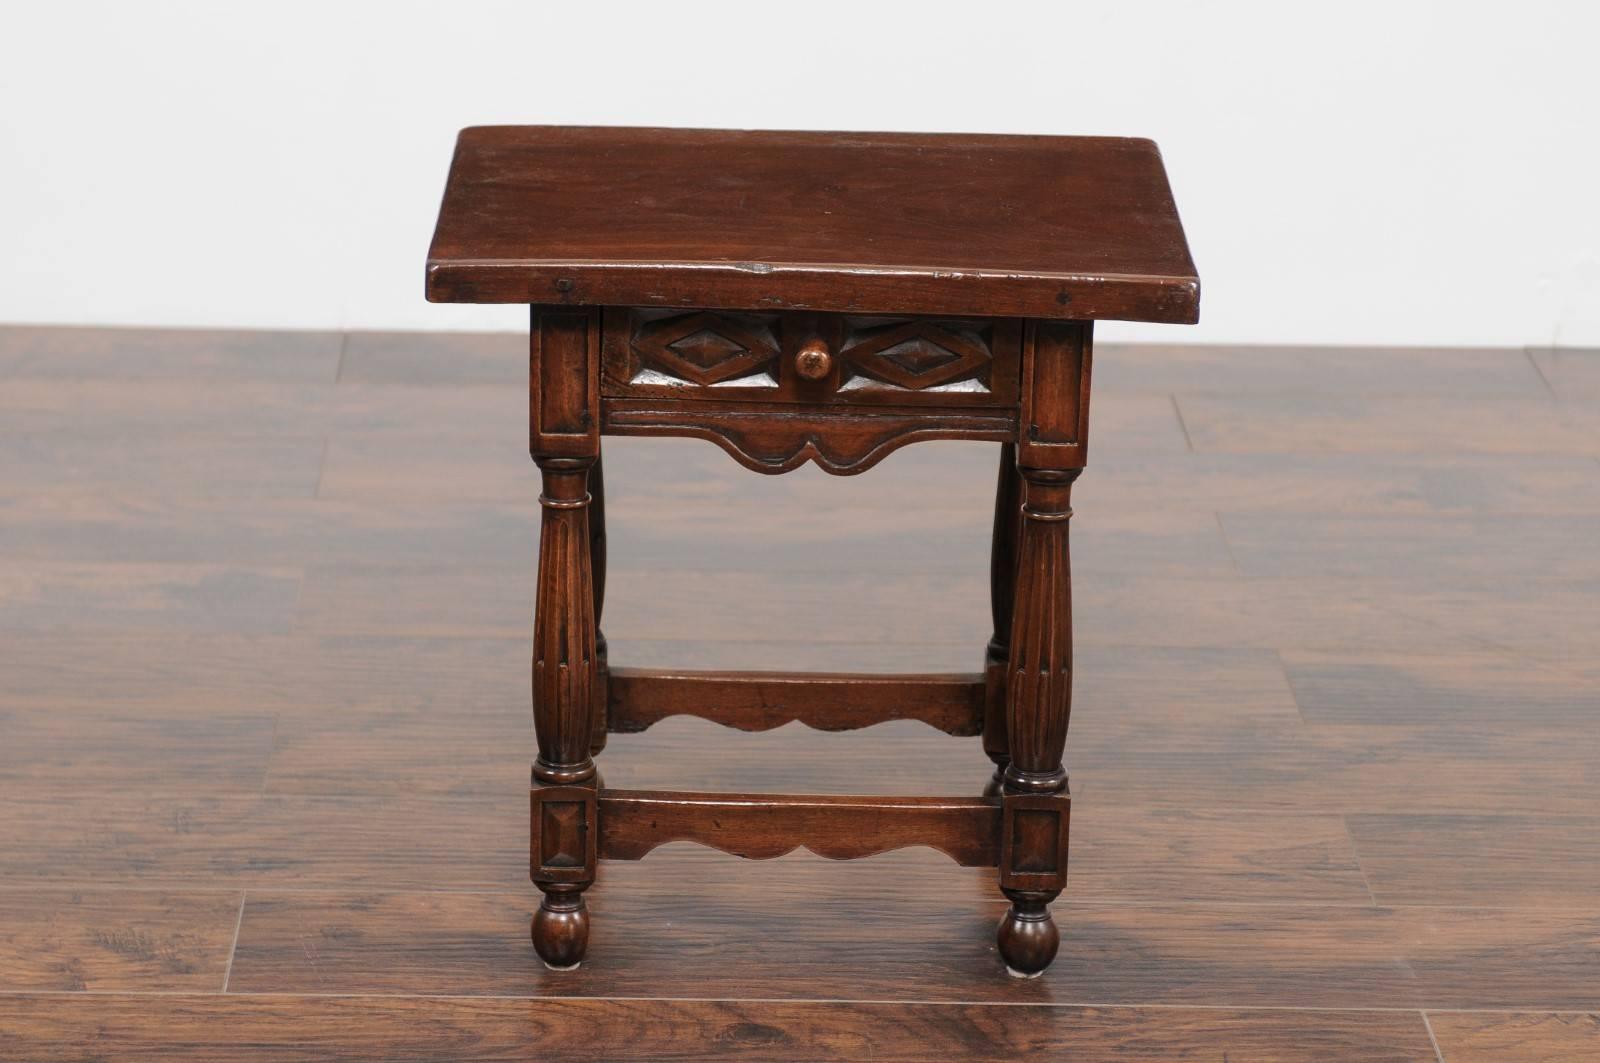 Petite Italian Walnut Side Table with Single Drawer and Fluted Legs, circa 1870 For Sale 1